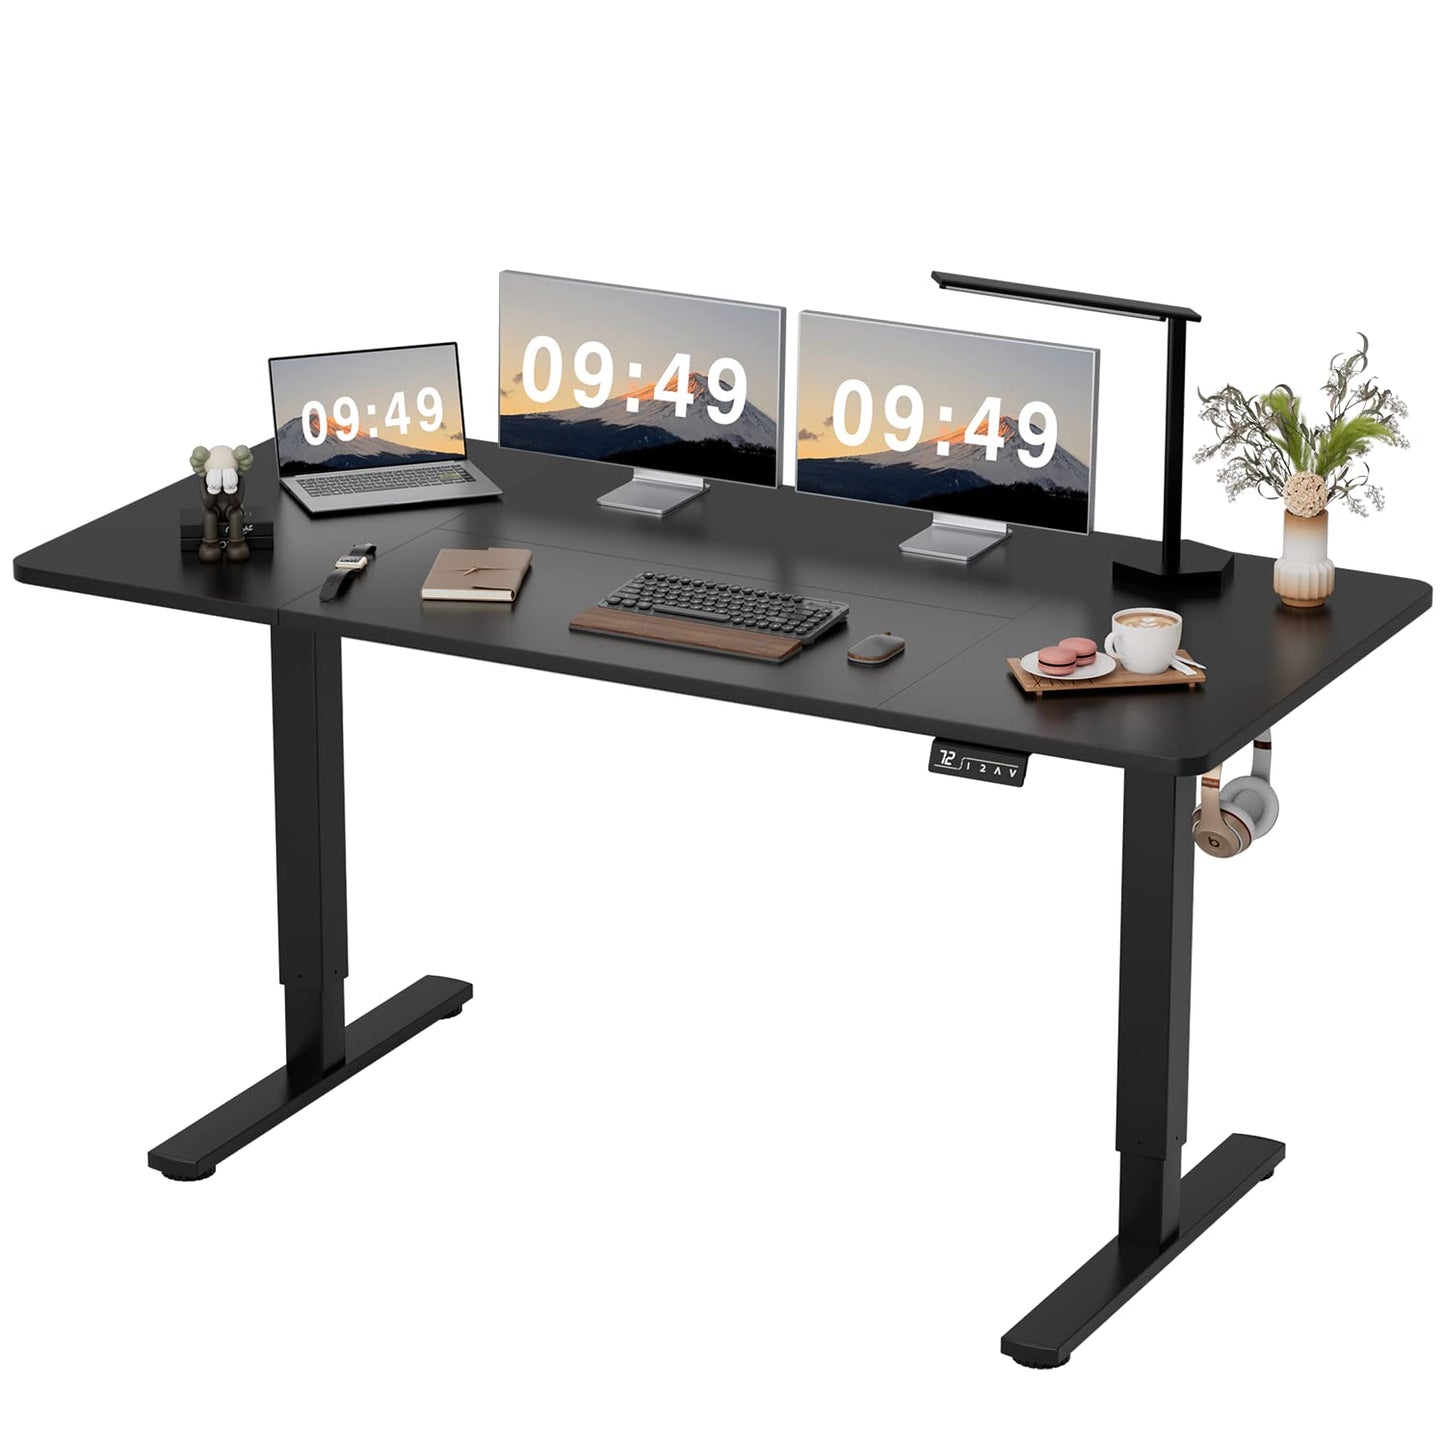 Furmax Electric Height Adjustable Standing Desk Large 63 x 24 Inches Sit Stand Up Desk Home Office Computer Desk Memory Preset with T-Shaped Metal